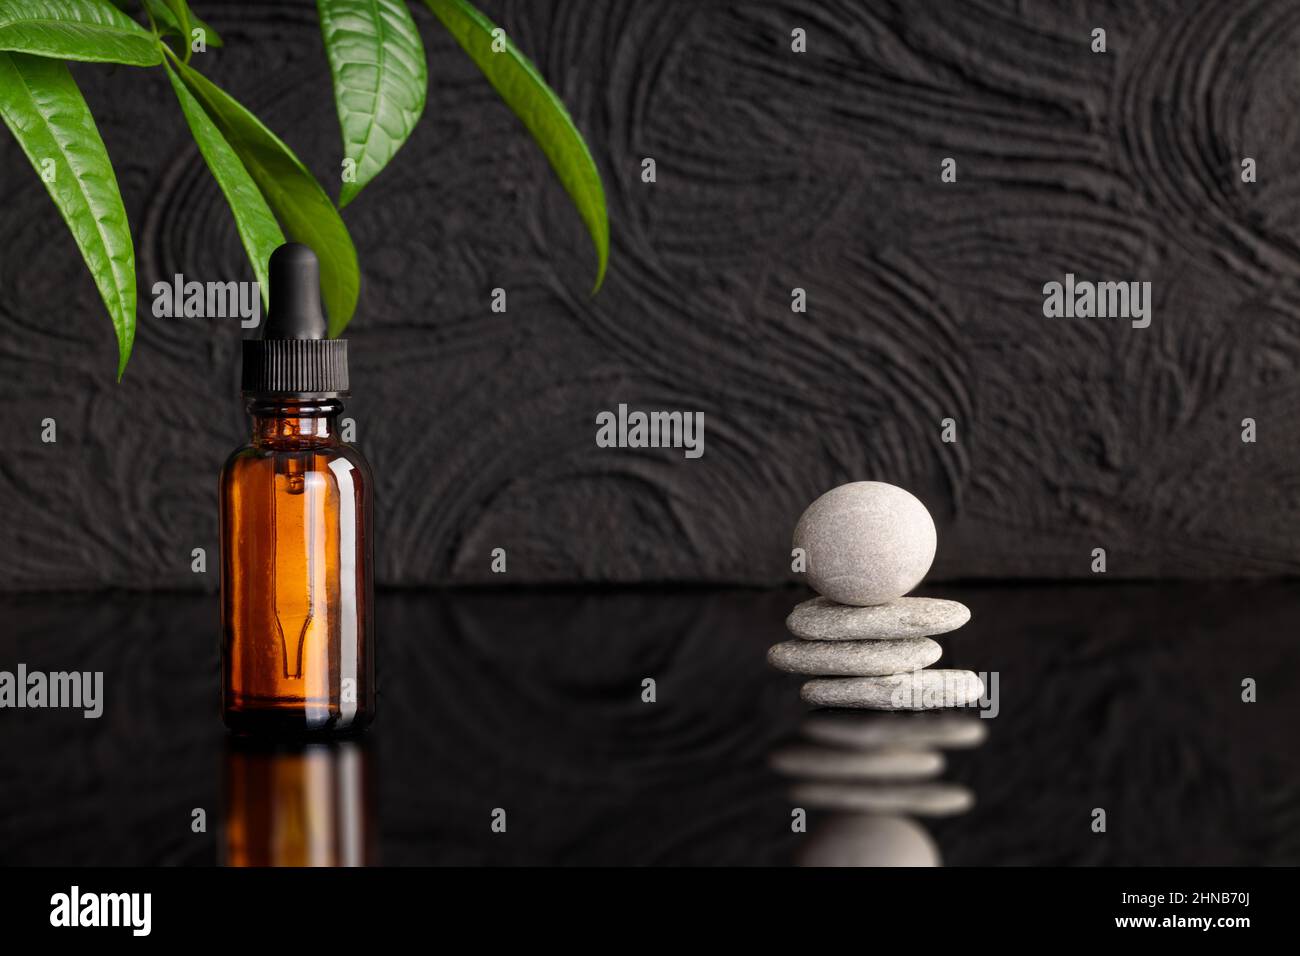 Pipette with oil, amber bottle on black background. Stone on stone, balance. Concept image, mockup. Stock Photo